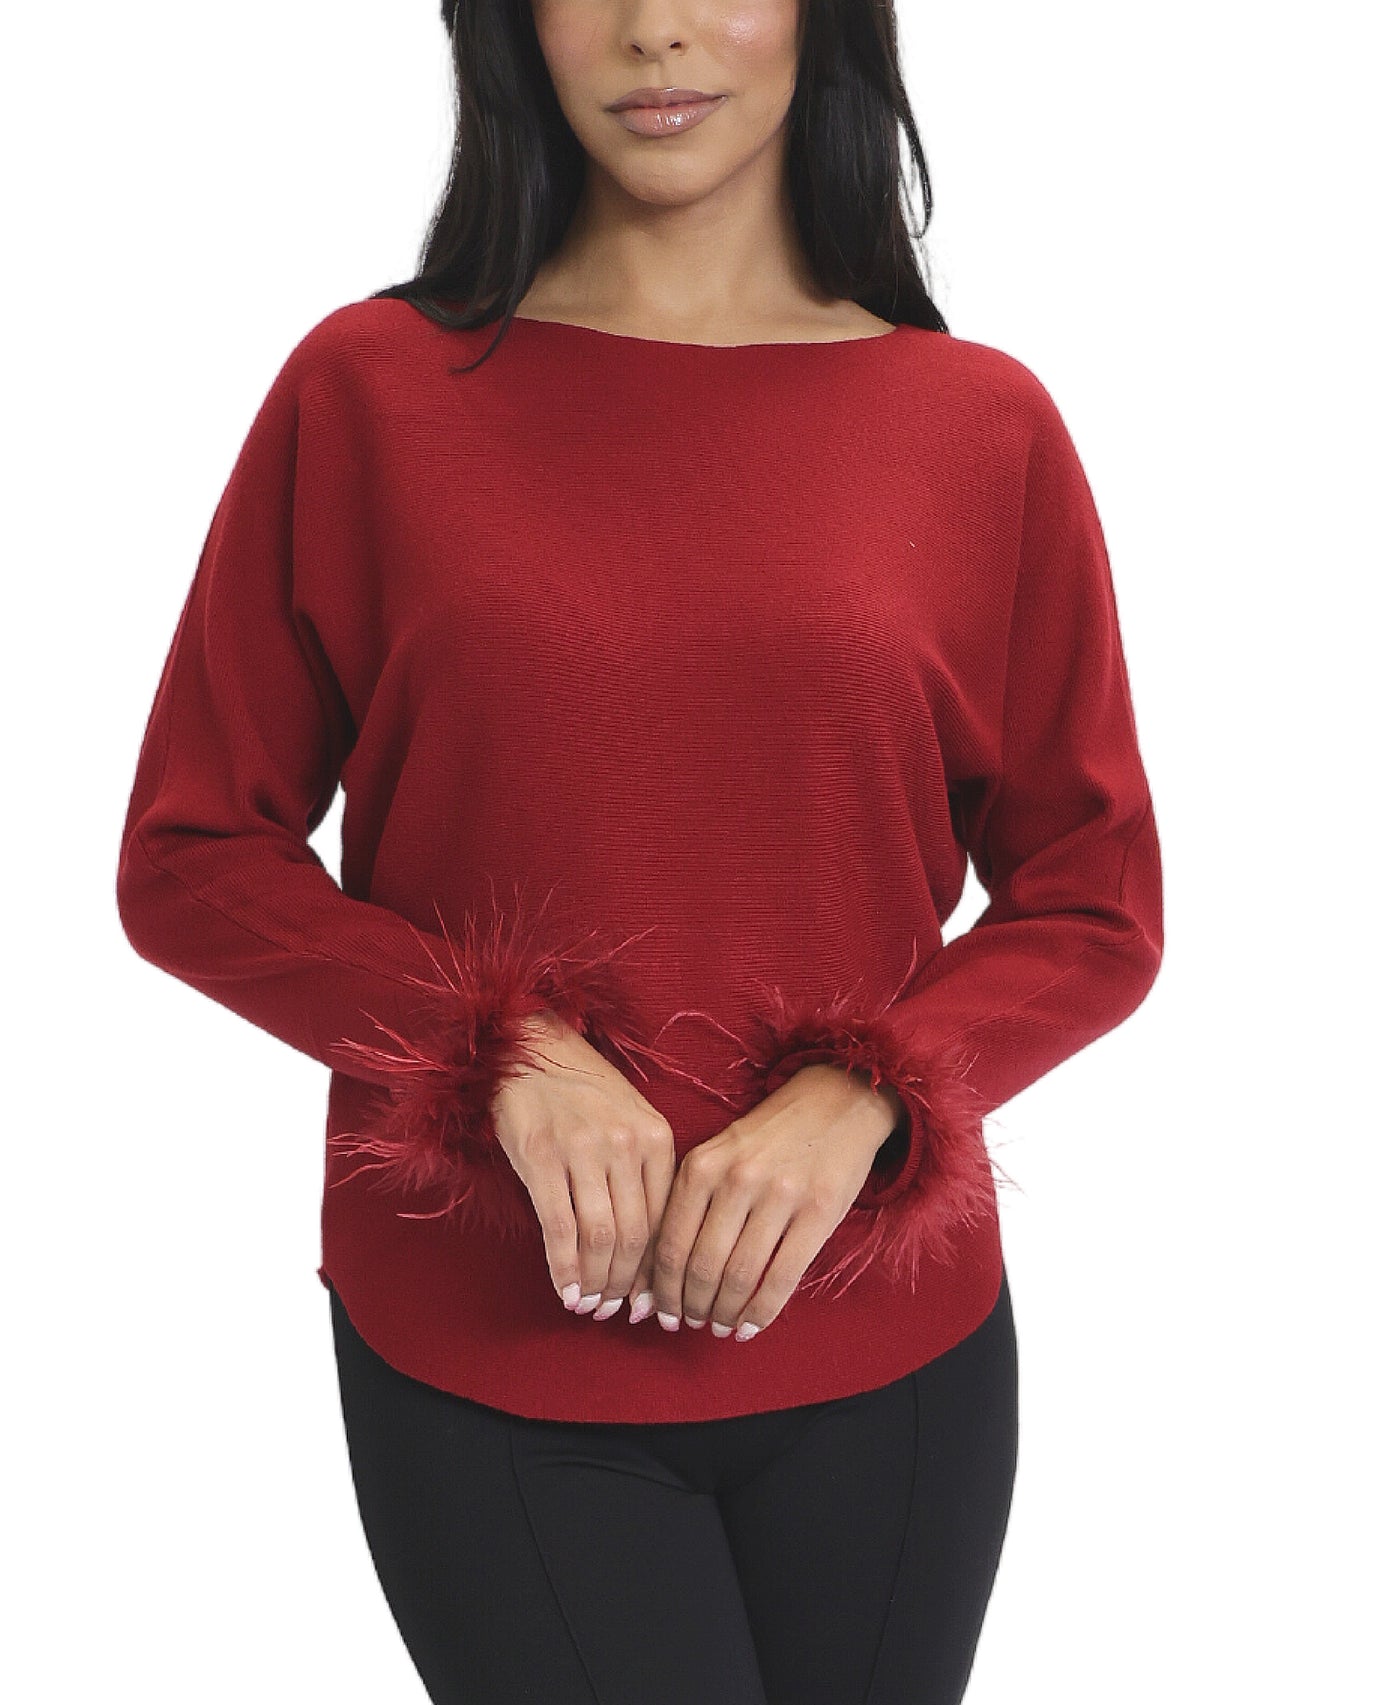 Sweater w/ Feather Cuffs image 1